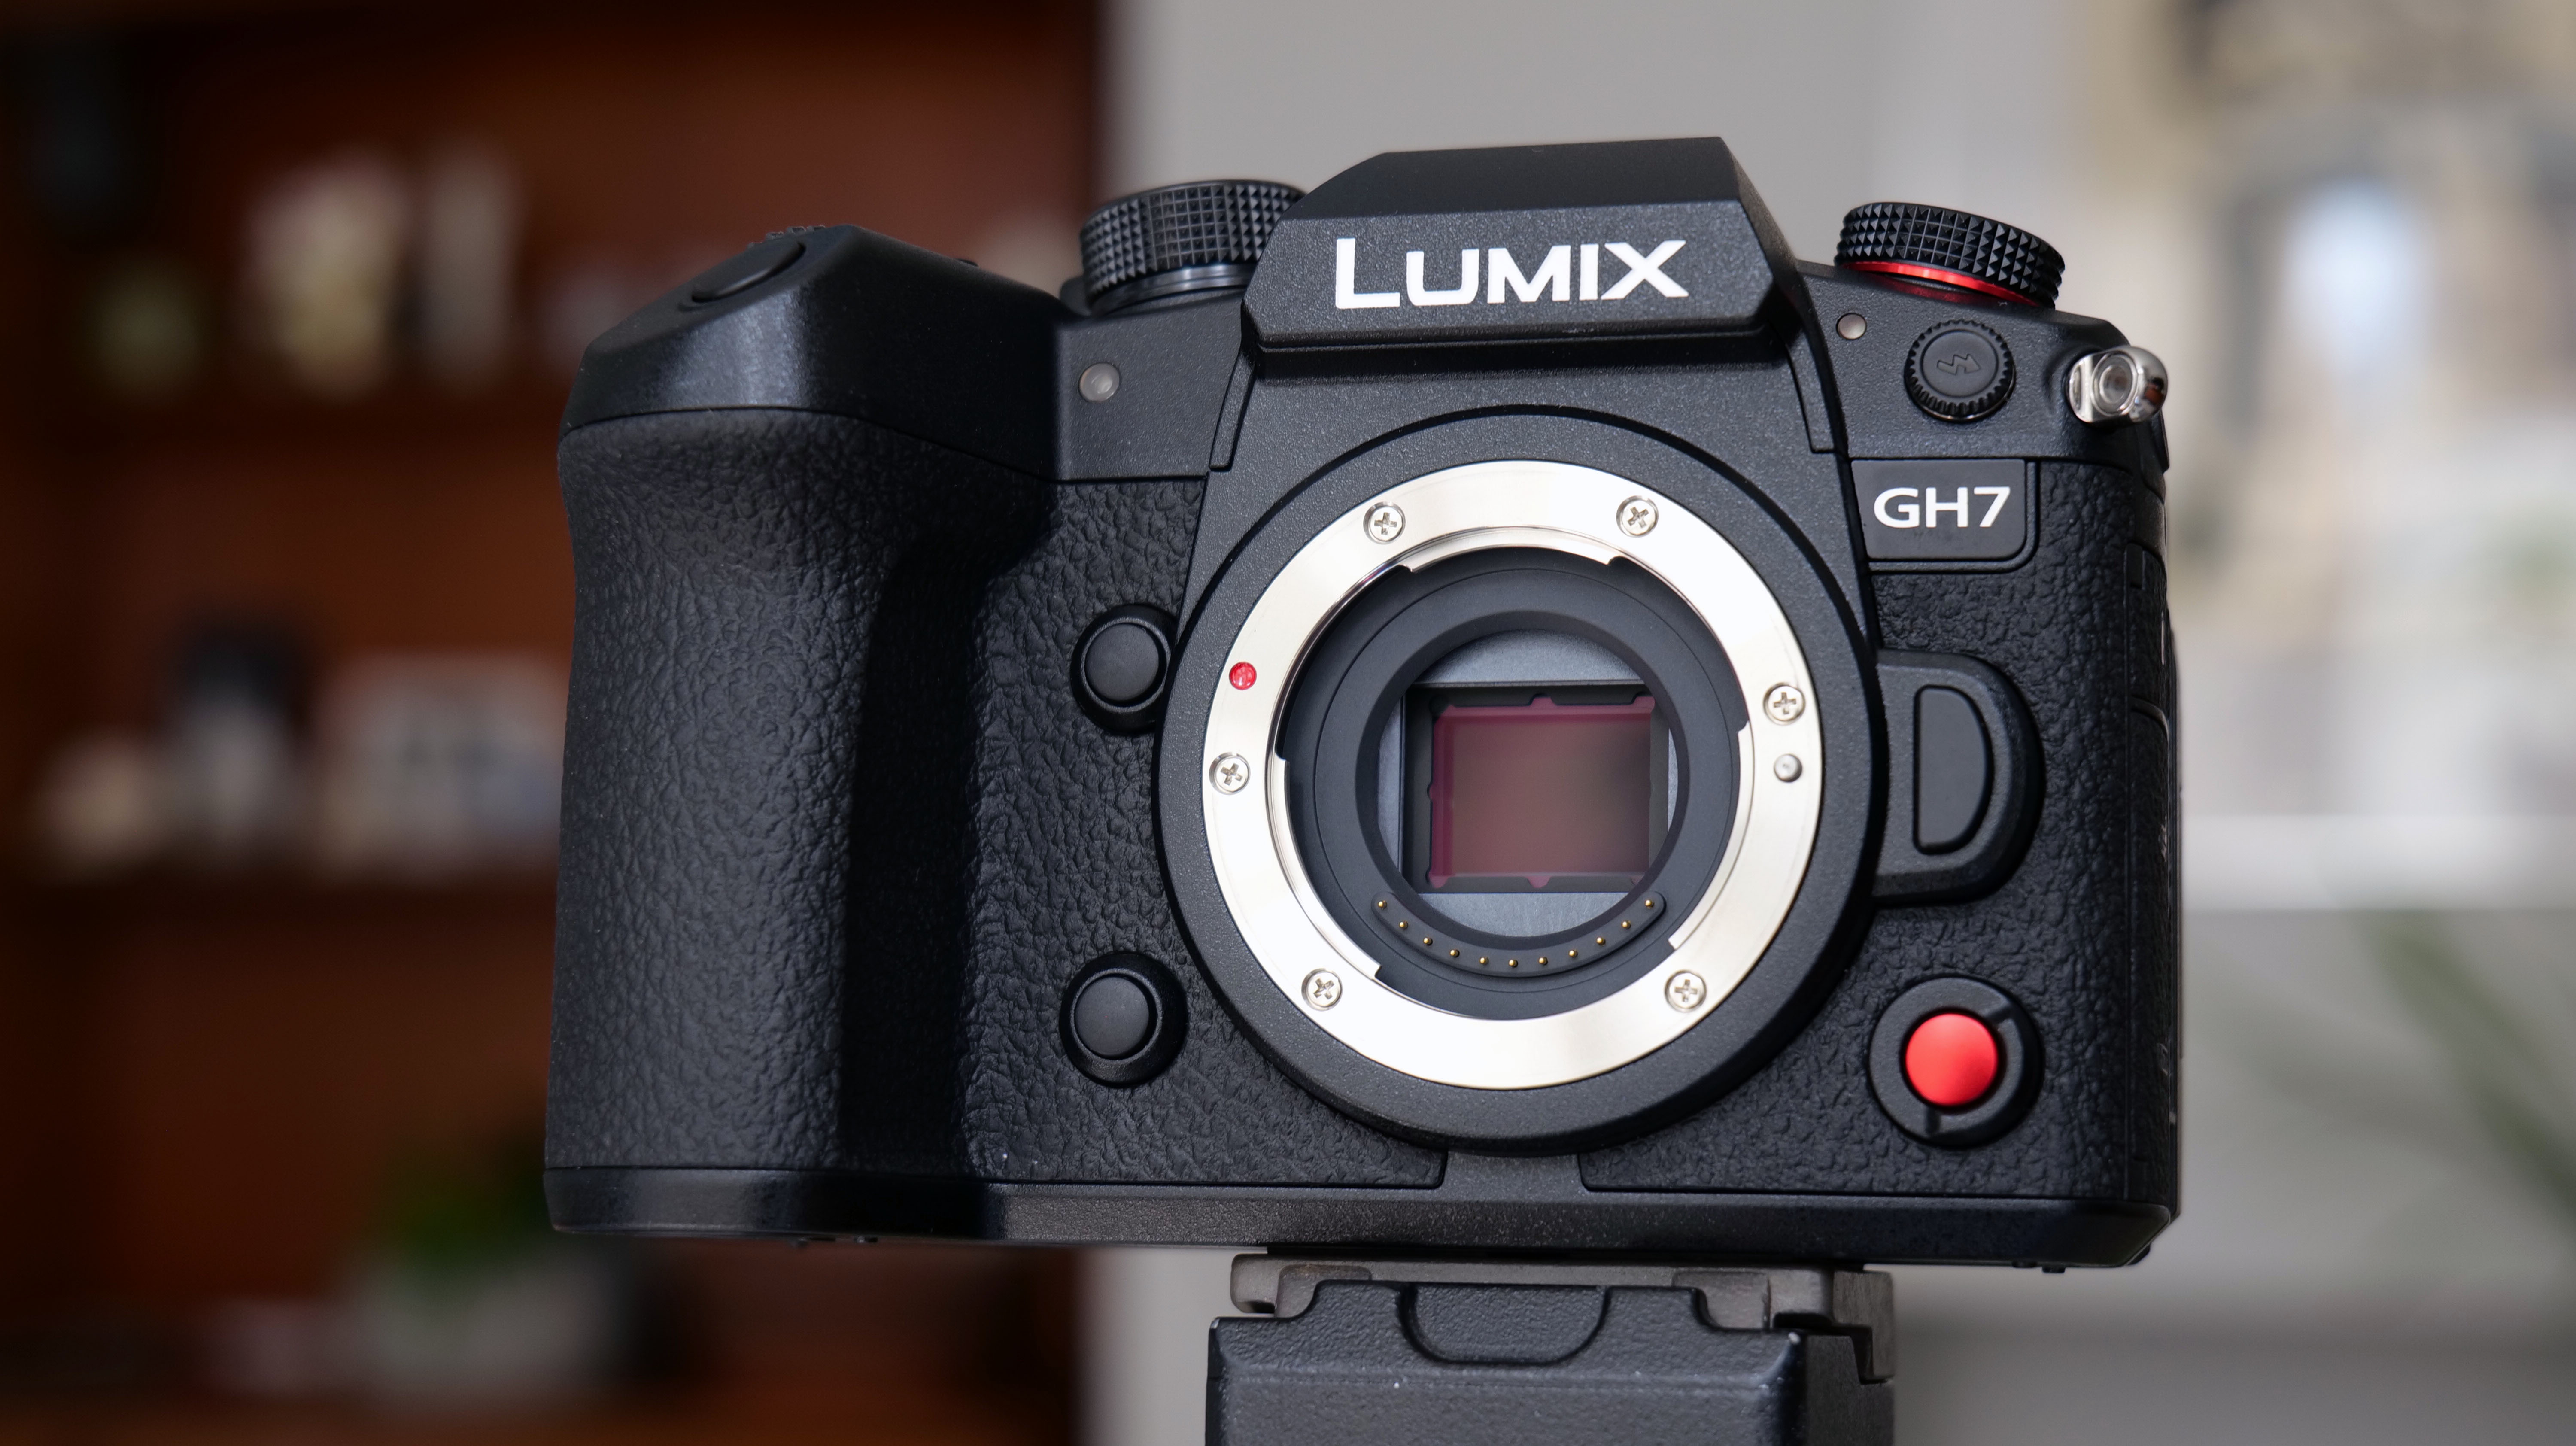 Panasonic Lumix GH7 camera's front with no lens attached